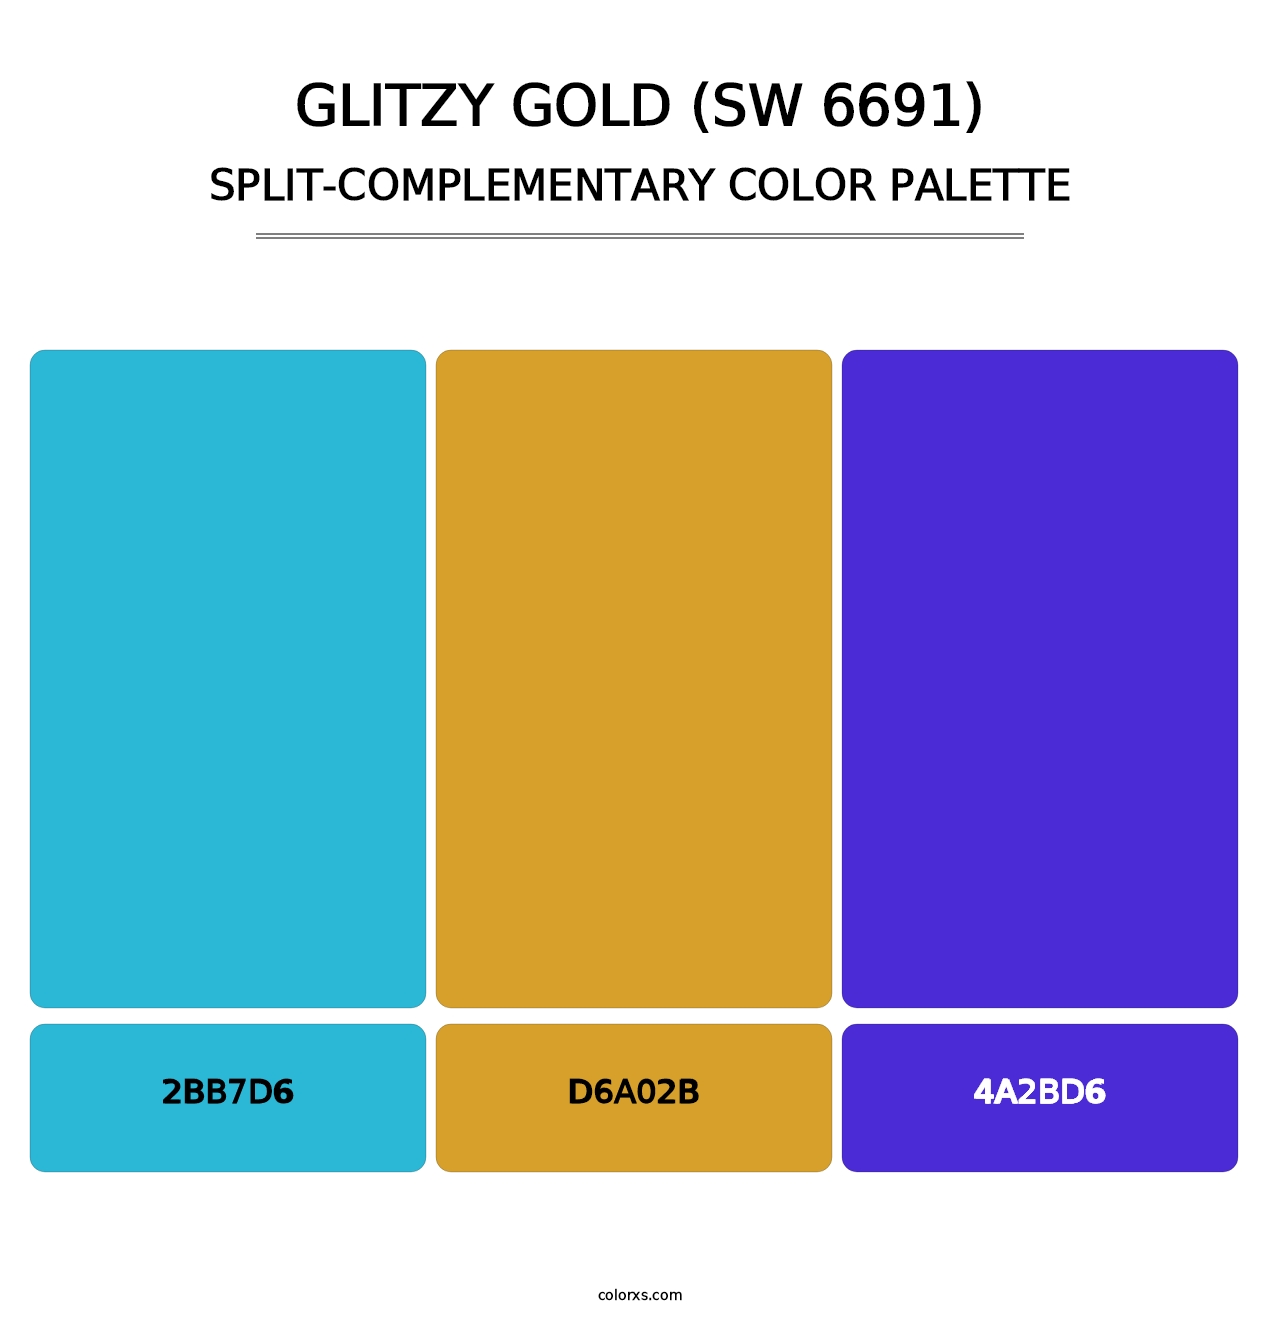 Glitzy Gold (SW 6691) - Split-Complementary Color Palette